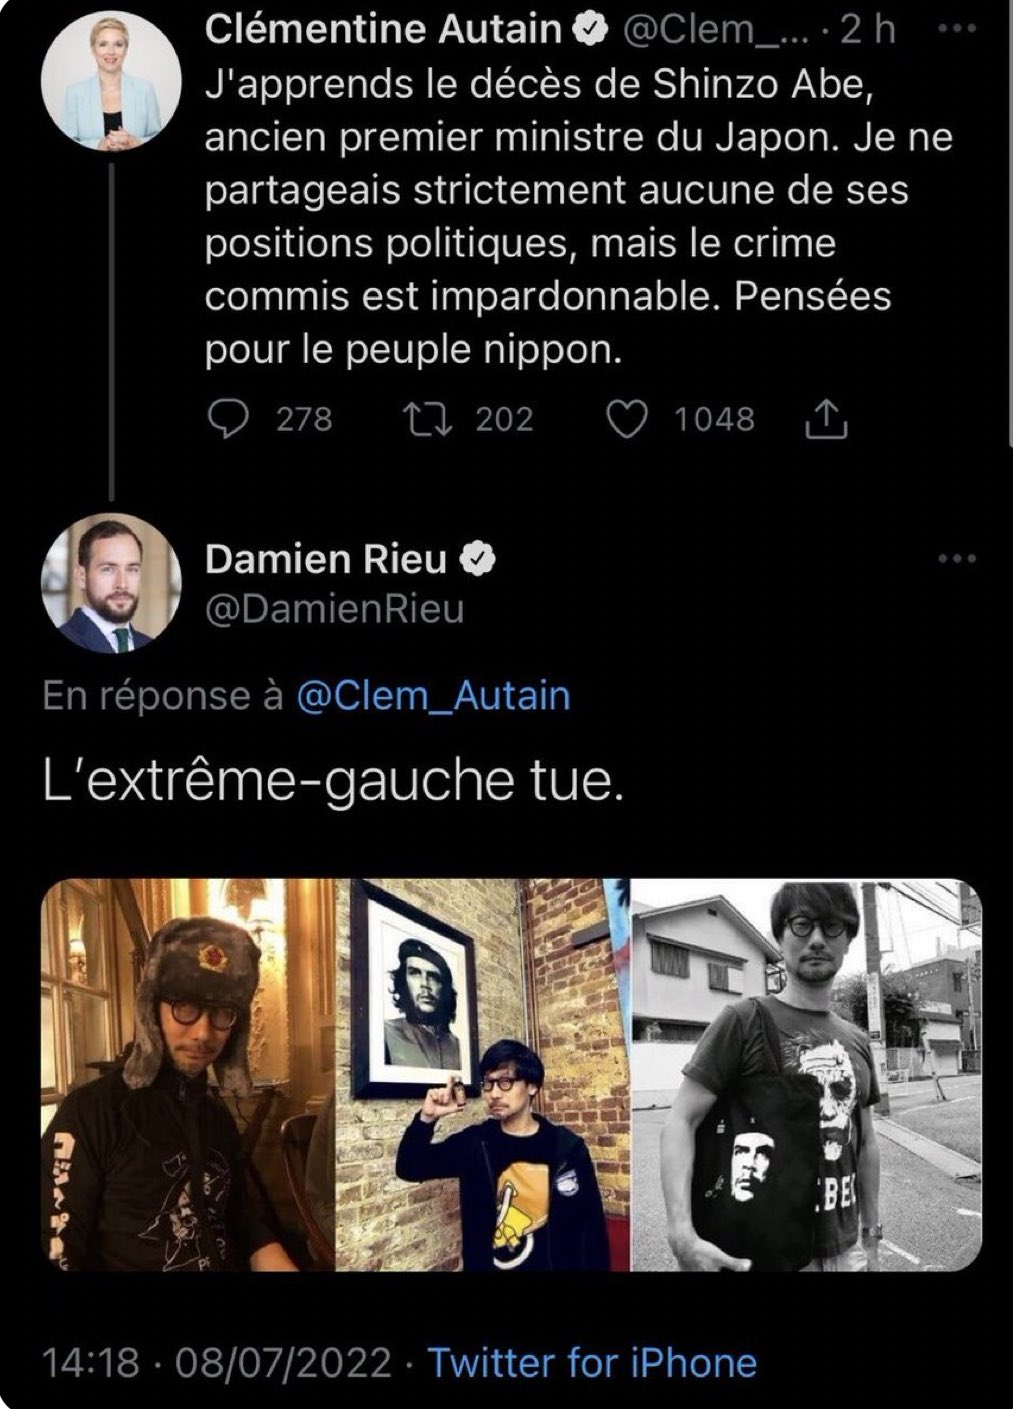 Cian Maher on X: I cannot believe a far-right French politician tweeted  that Hideo Kojima assassinated the prime minister of Japan and news  channels are actually running with it. Holy shit  /